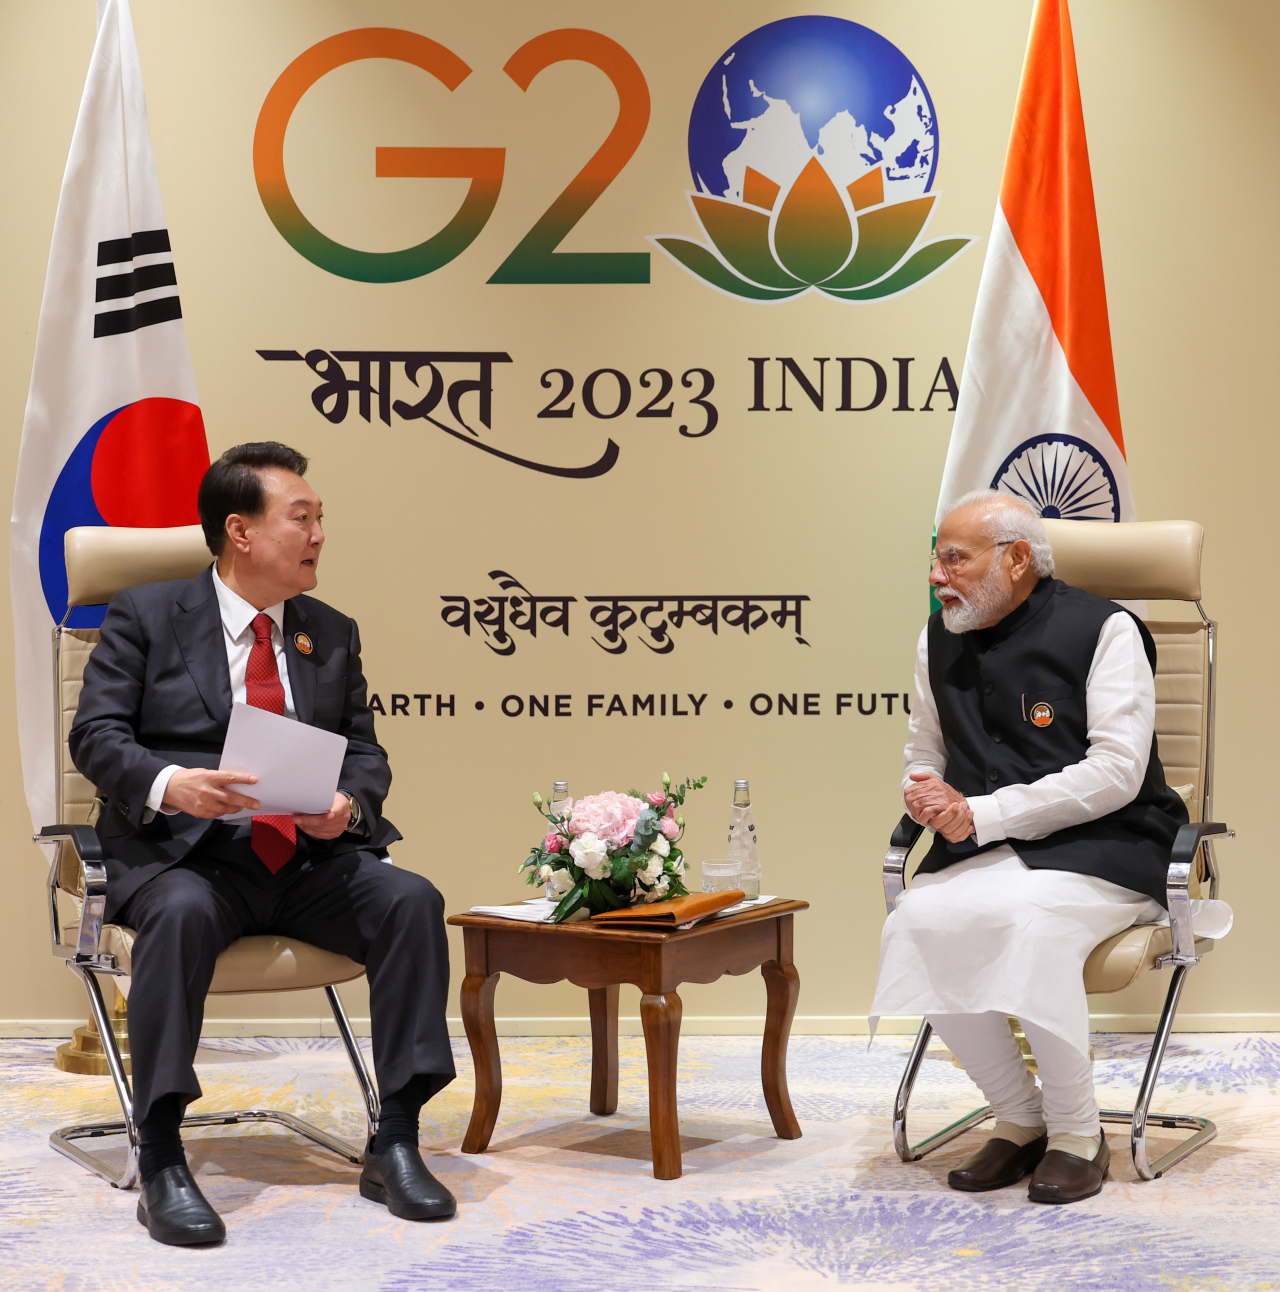 President Yoon Suk Yeol and Indian Prime Minister Narendra Modi discuss areas of cooperation during their bilateral meeting held on the sidelines of a Group of 20 summit in New Delhi in Sept. 2023. (Indian Embassy in Seoul)